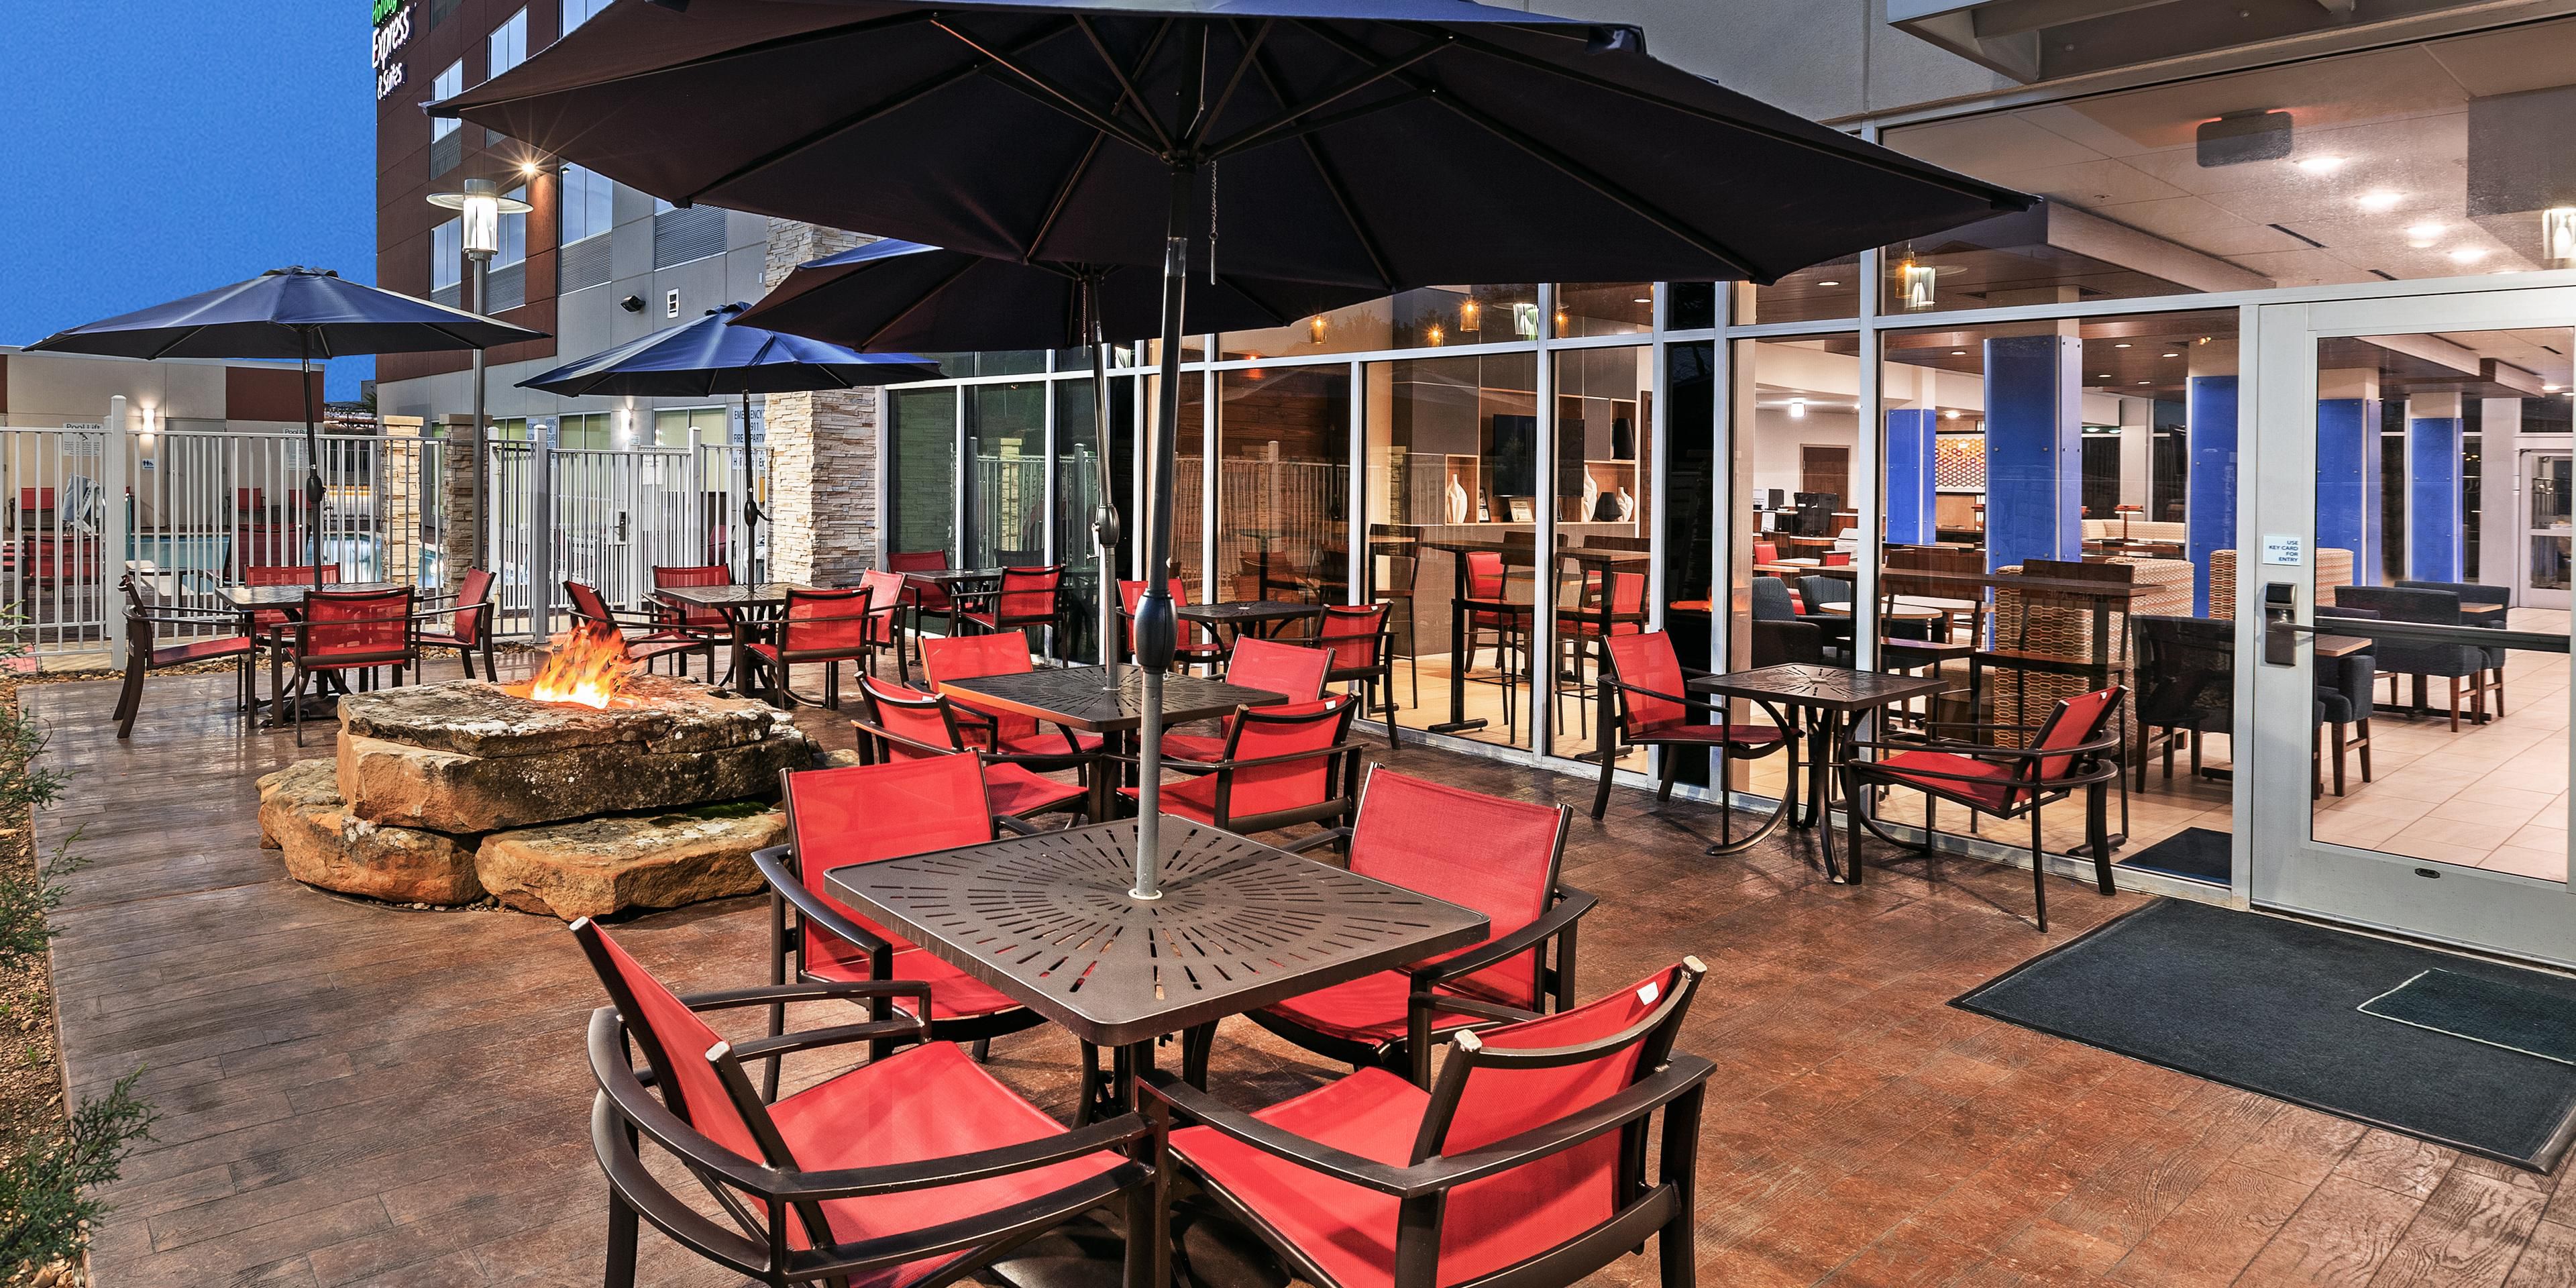 Our outdoor patio and fire pit area are open for your enjoyment! It's time for some outdoor, fresh air, around the fire pit conversations with friends, family, or colleagues! We're confident you'll love our outdoor space.